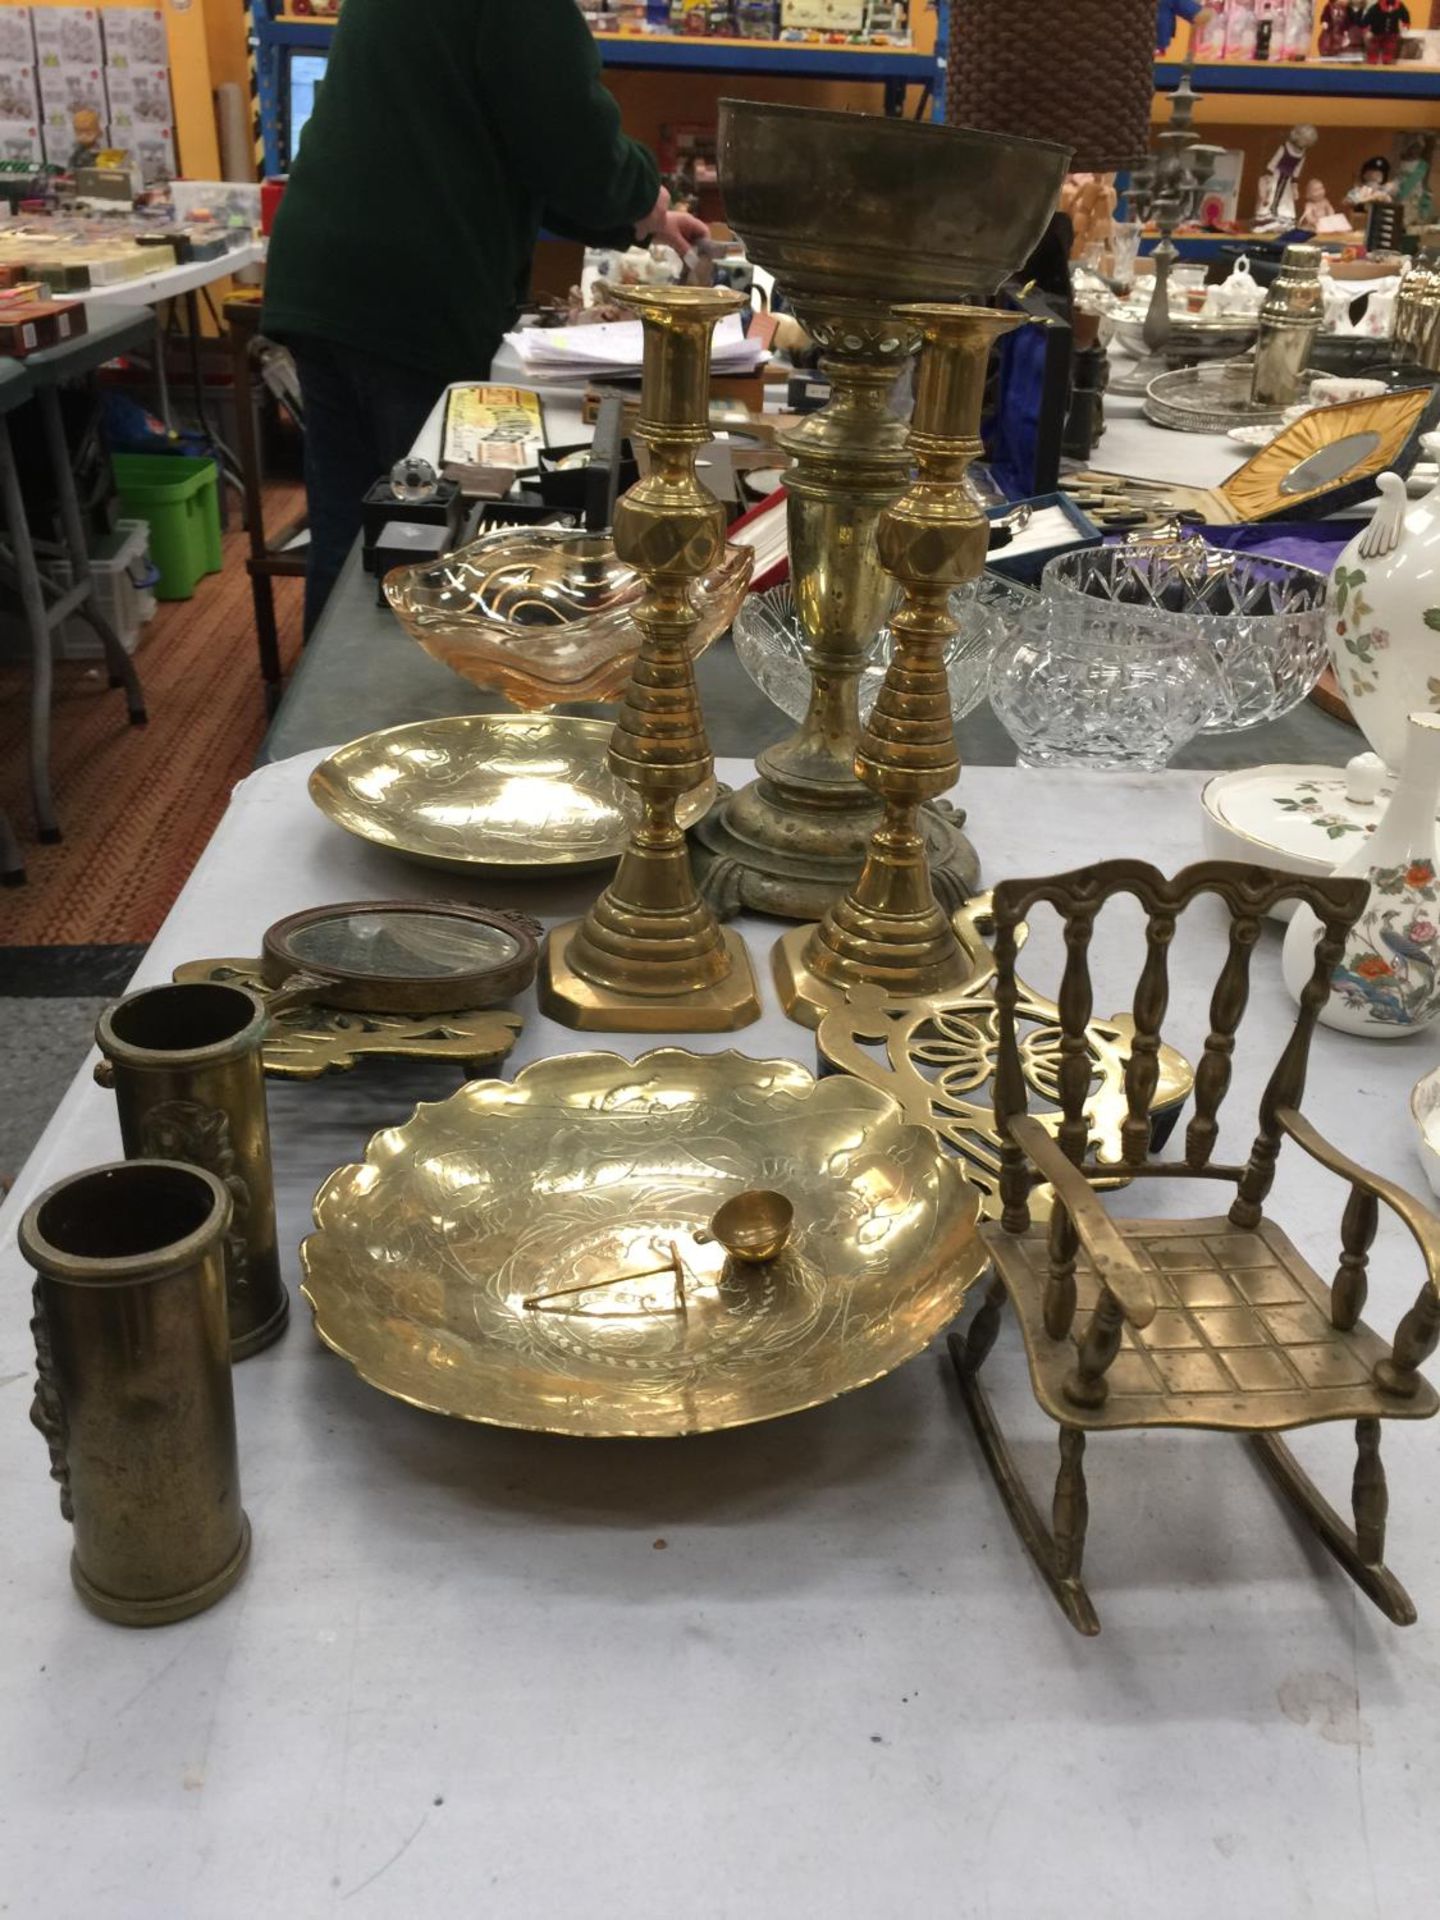 A QUANTITY OF BRASSWARE TO INCLUDE A PLANT HOLDER, CANDLESTICKS, TRIVETS, BOWLS, ETC - Image 6 of 9